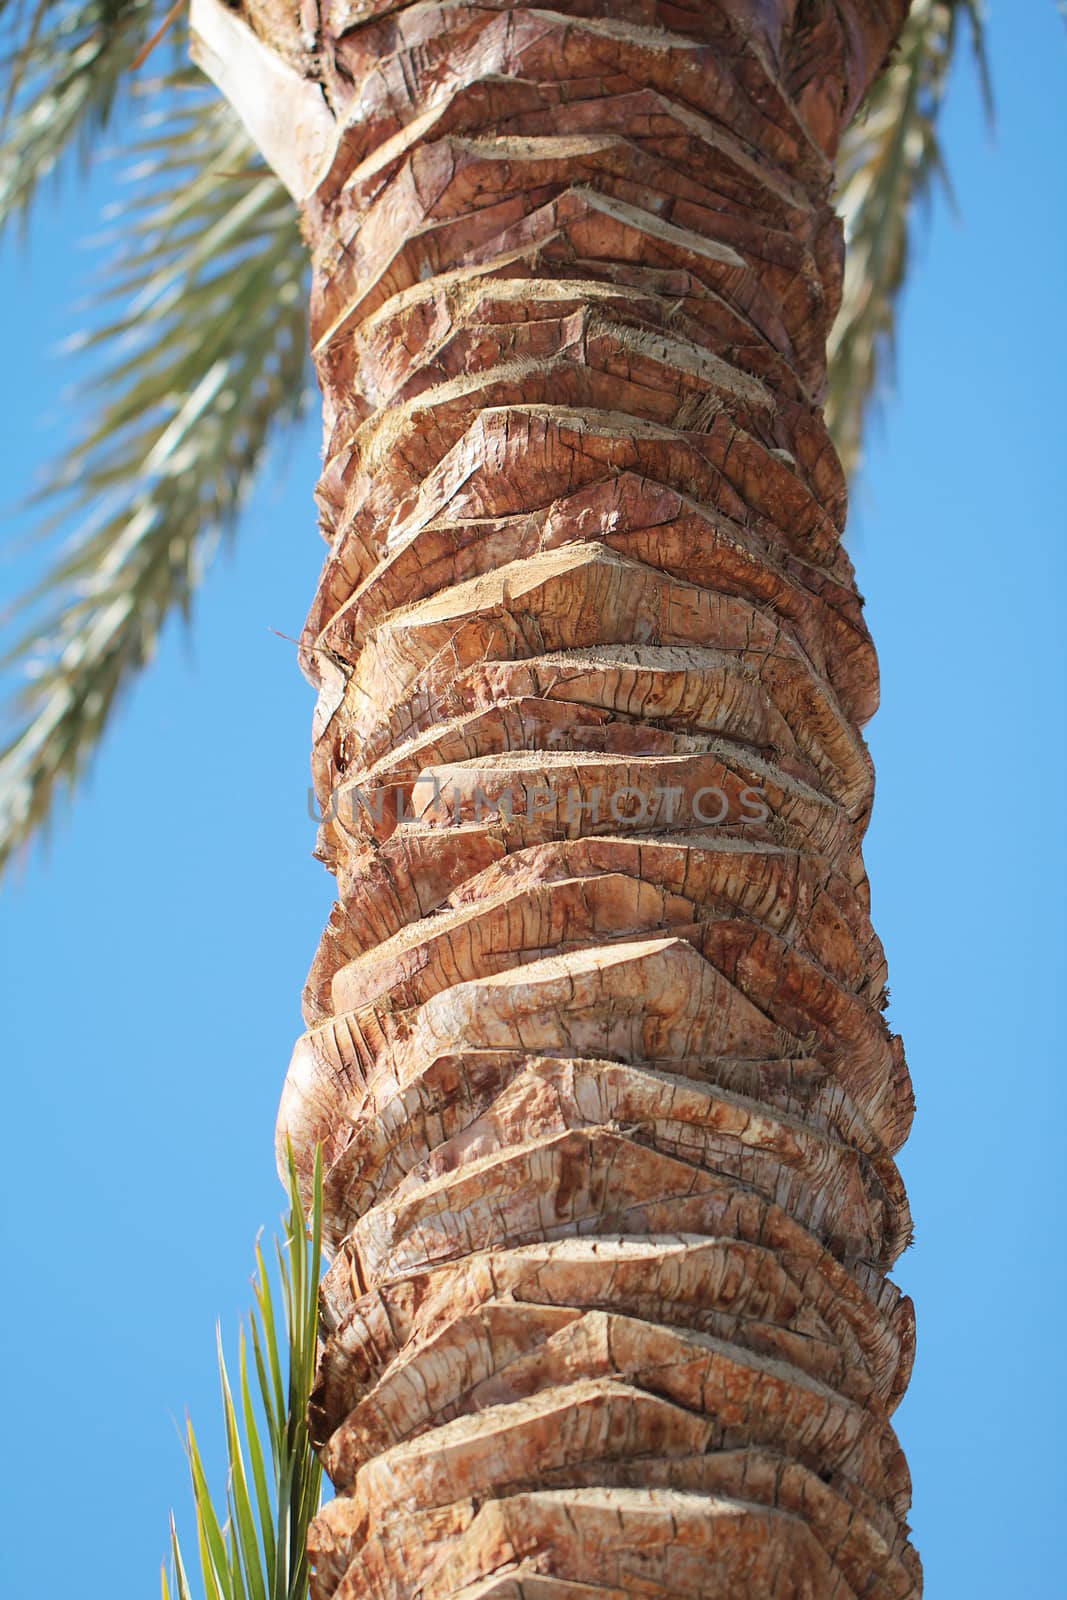 Date palm close up photo by Voinakh